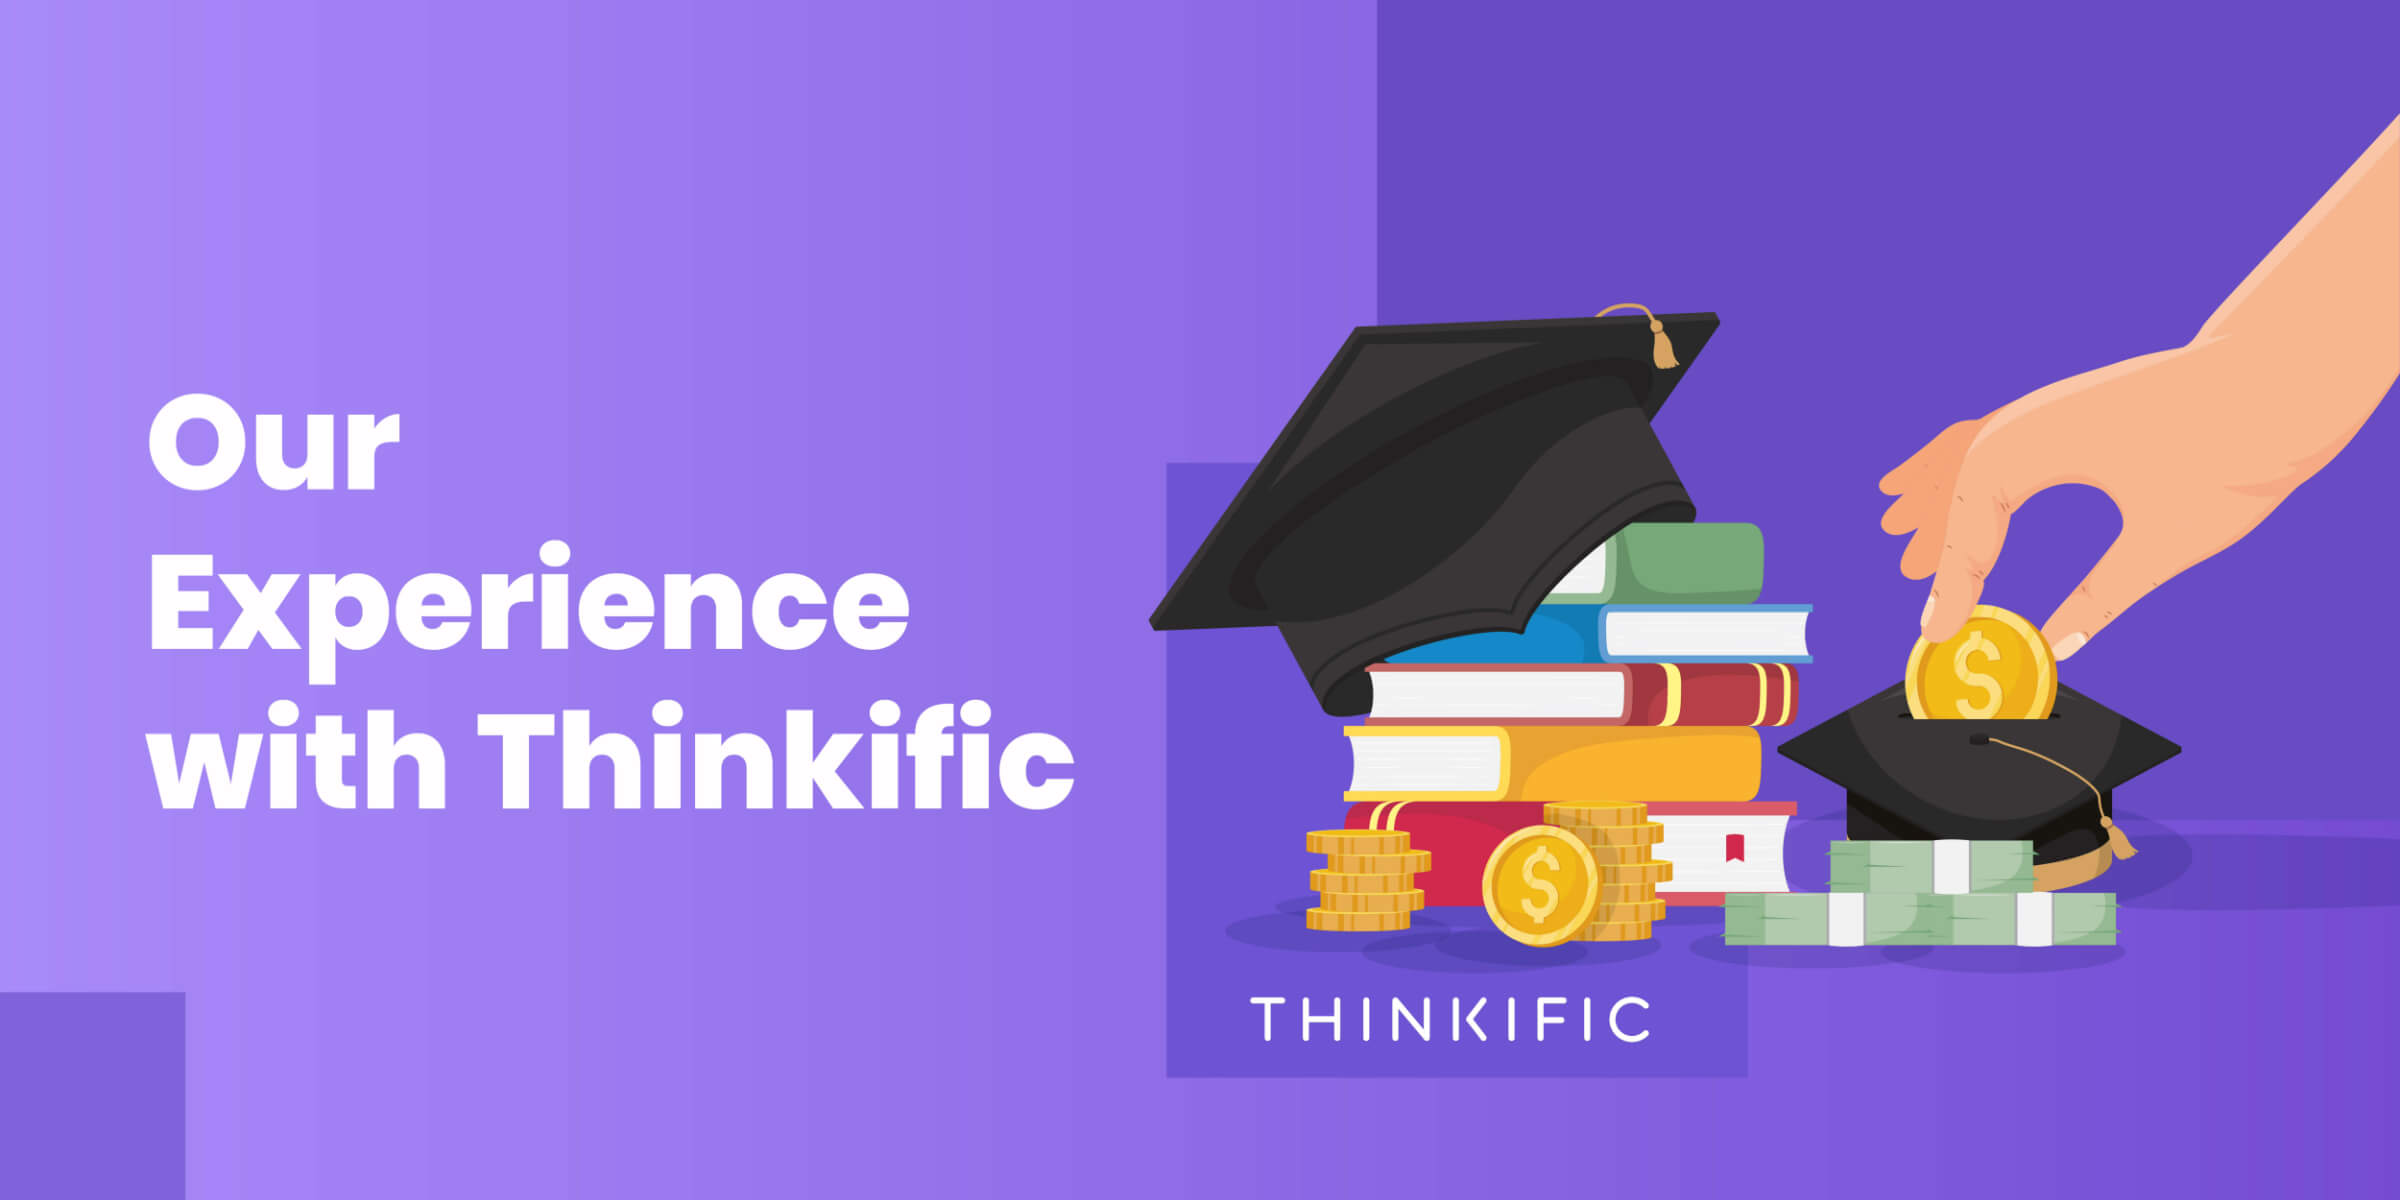 Our Experience With Thinkific